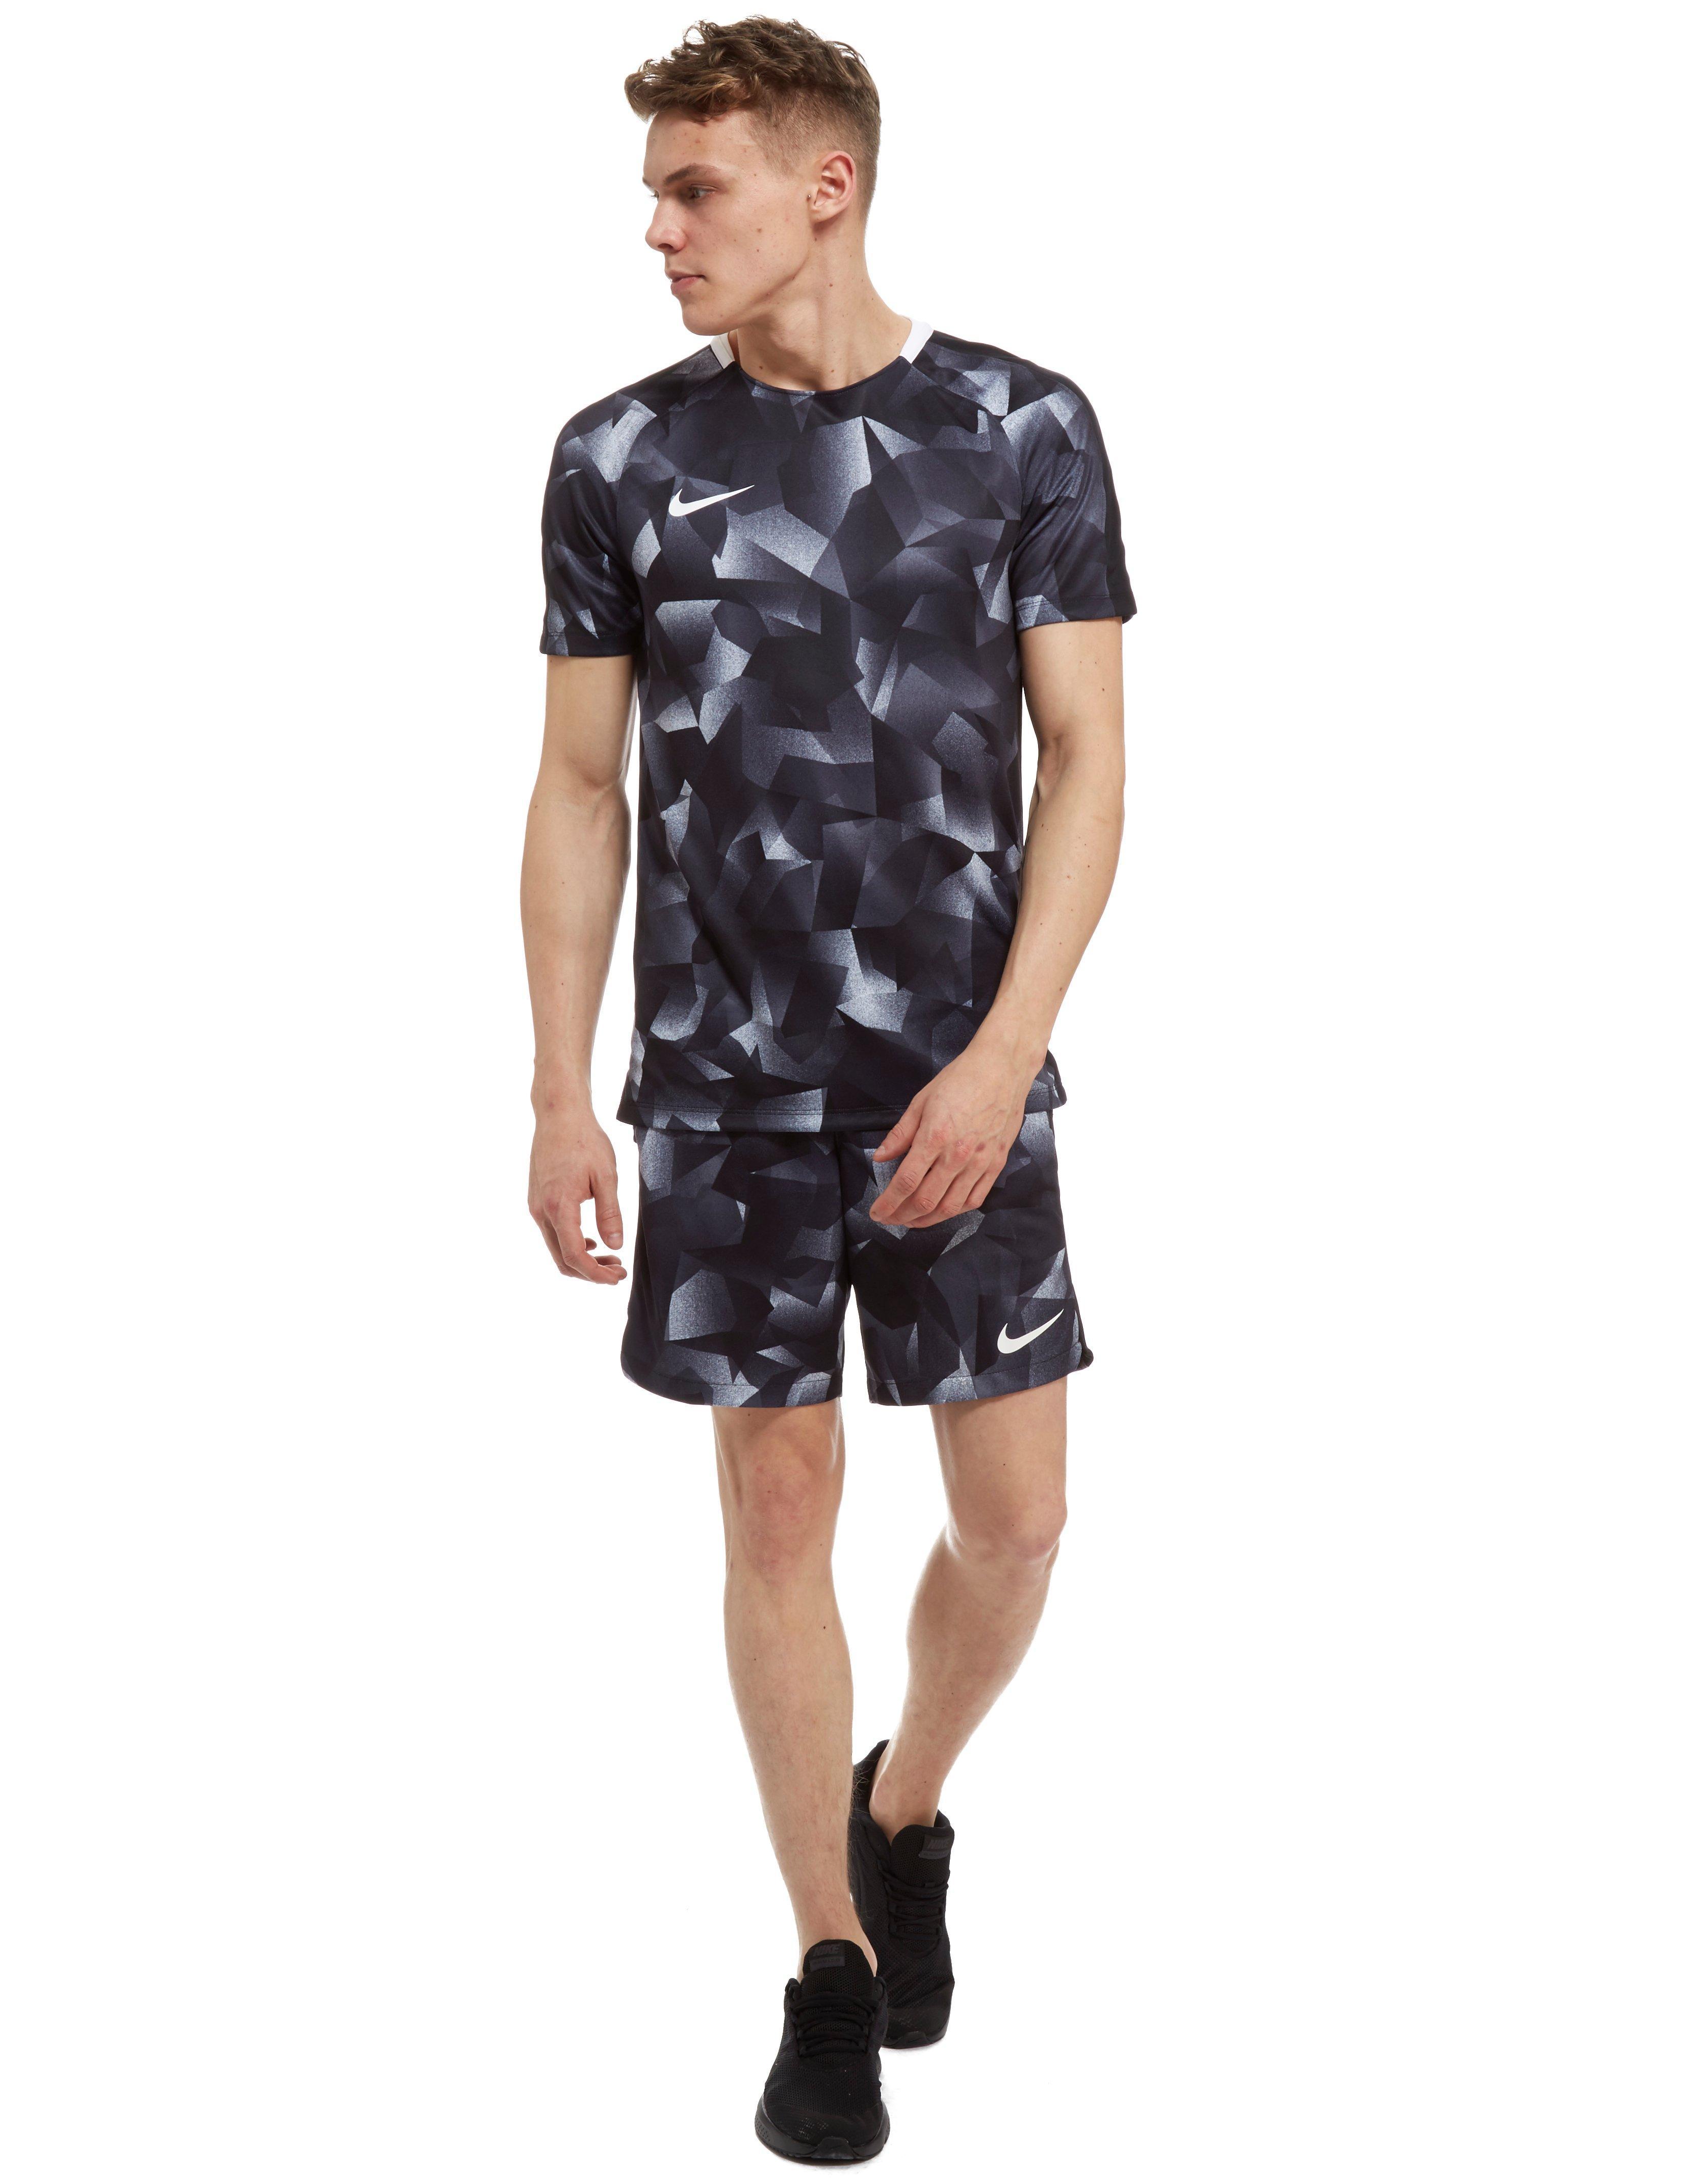 Nike Synthetic Squad Camo T-shirt in 